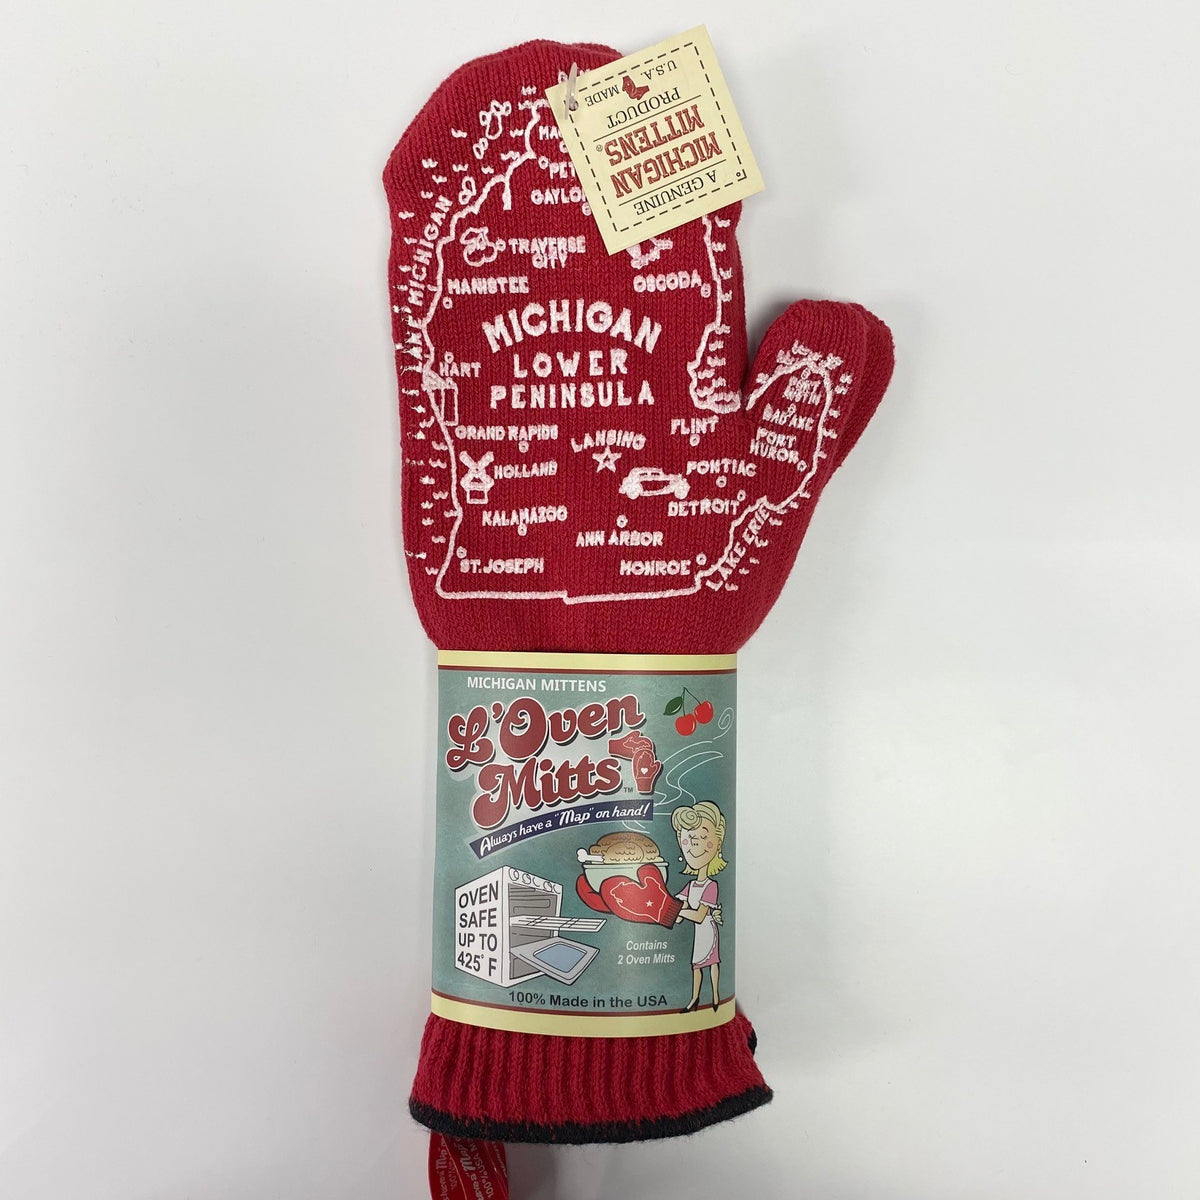 The Oven Mitts – Coming Soon